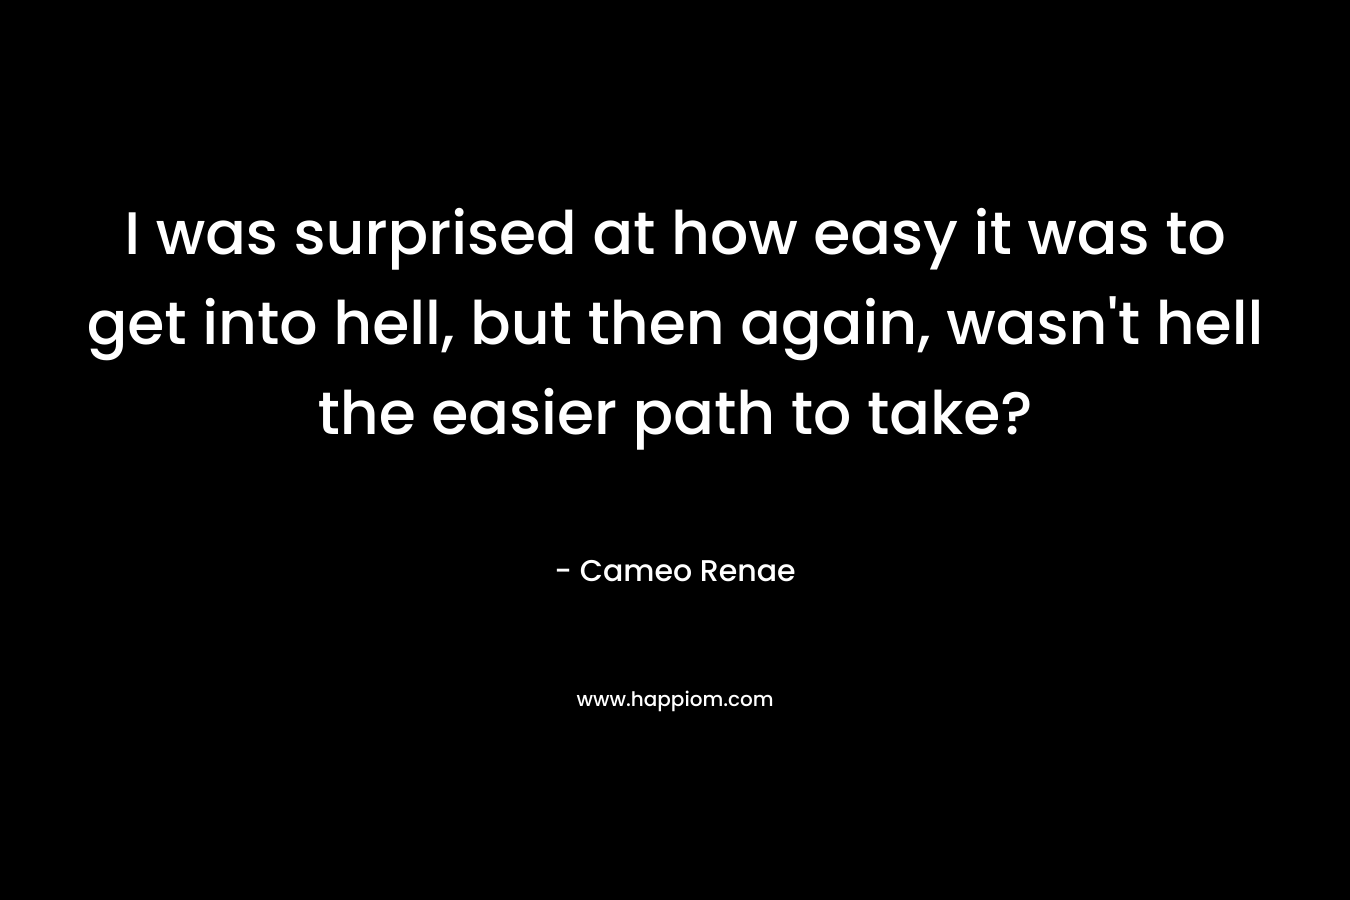 I was surprised at how easy it was to get into hell, but then again, wasn’t hell the easier path to take? – Cameo Renae